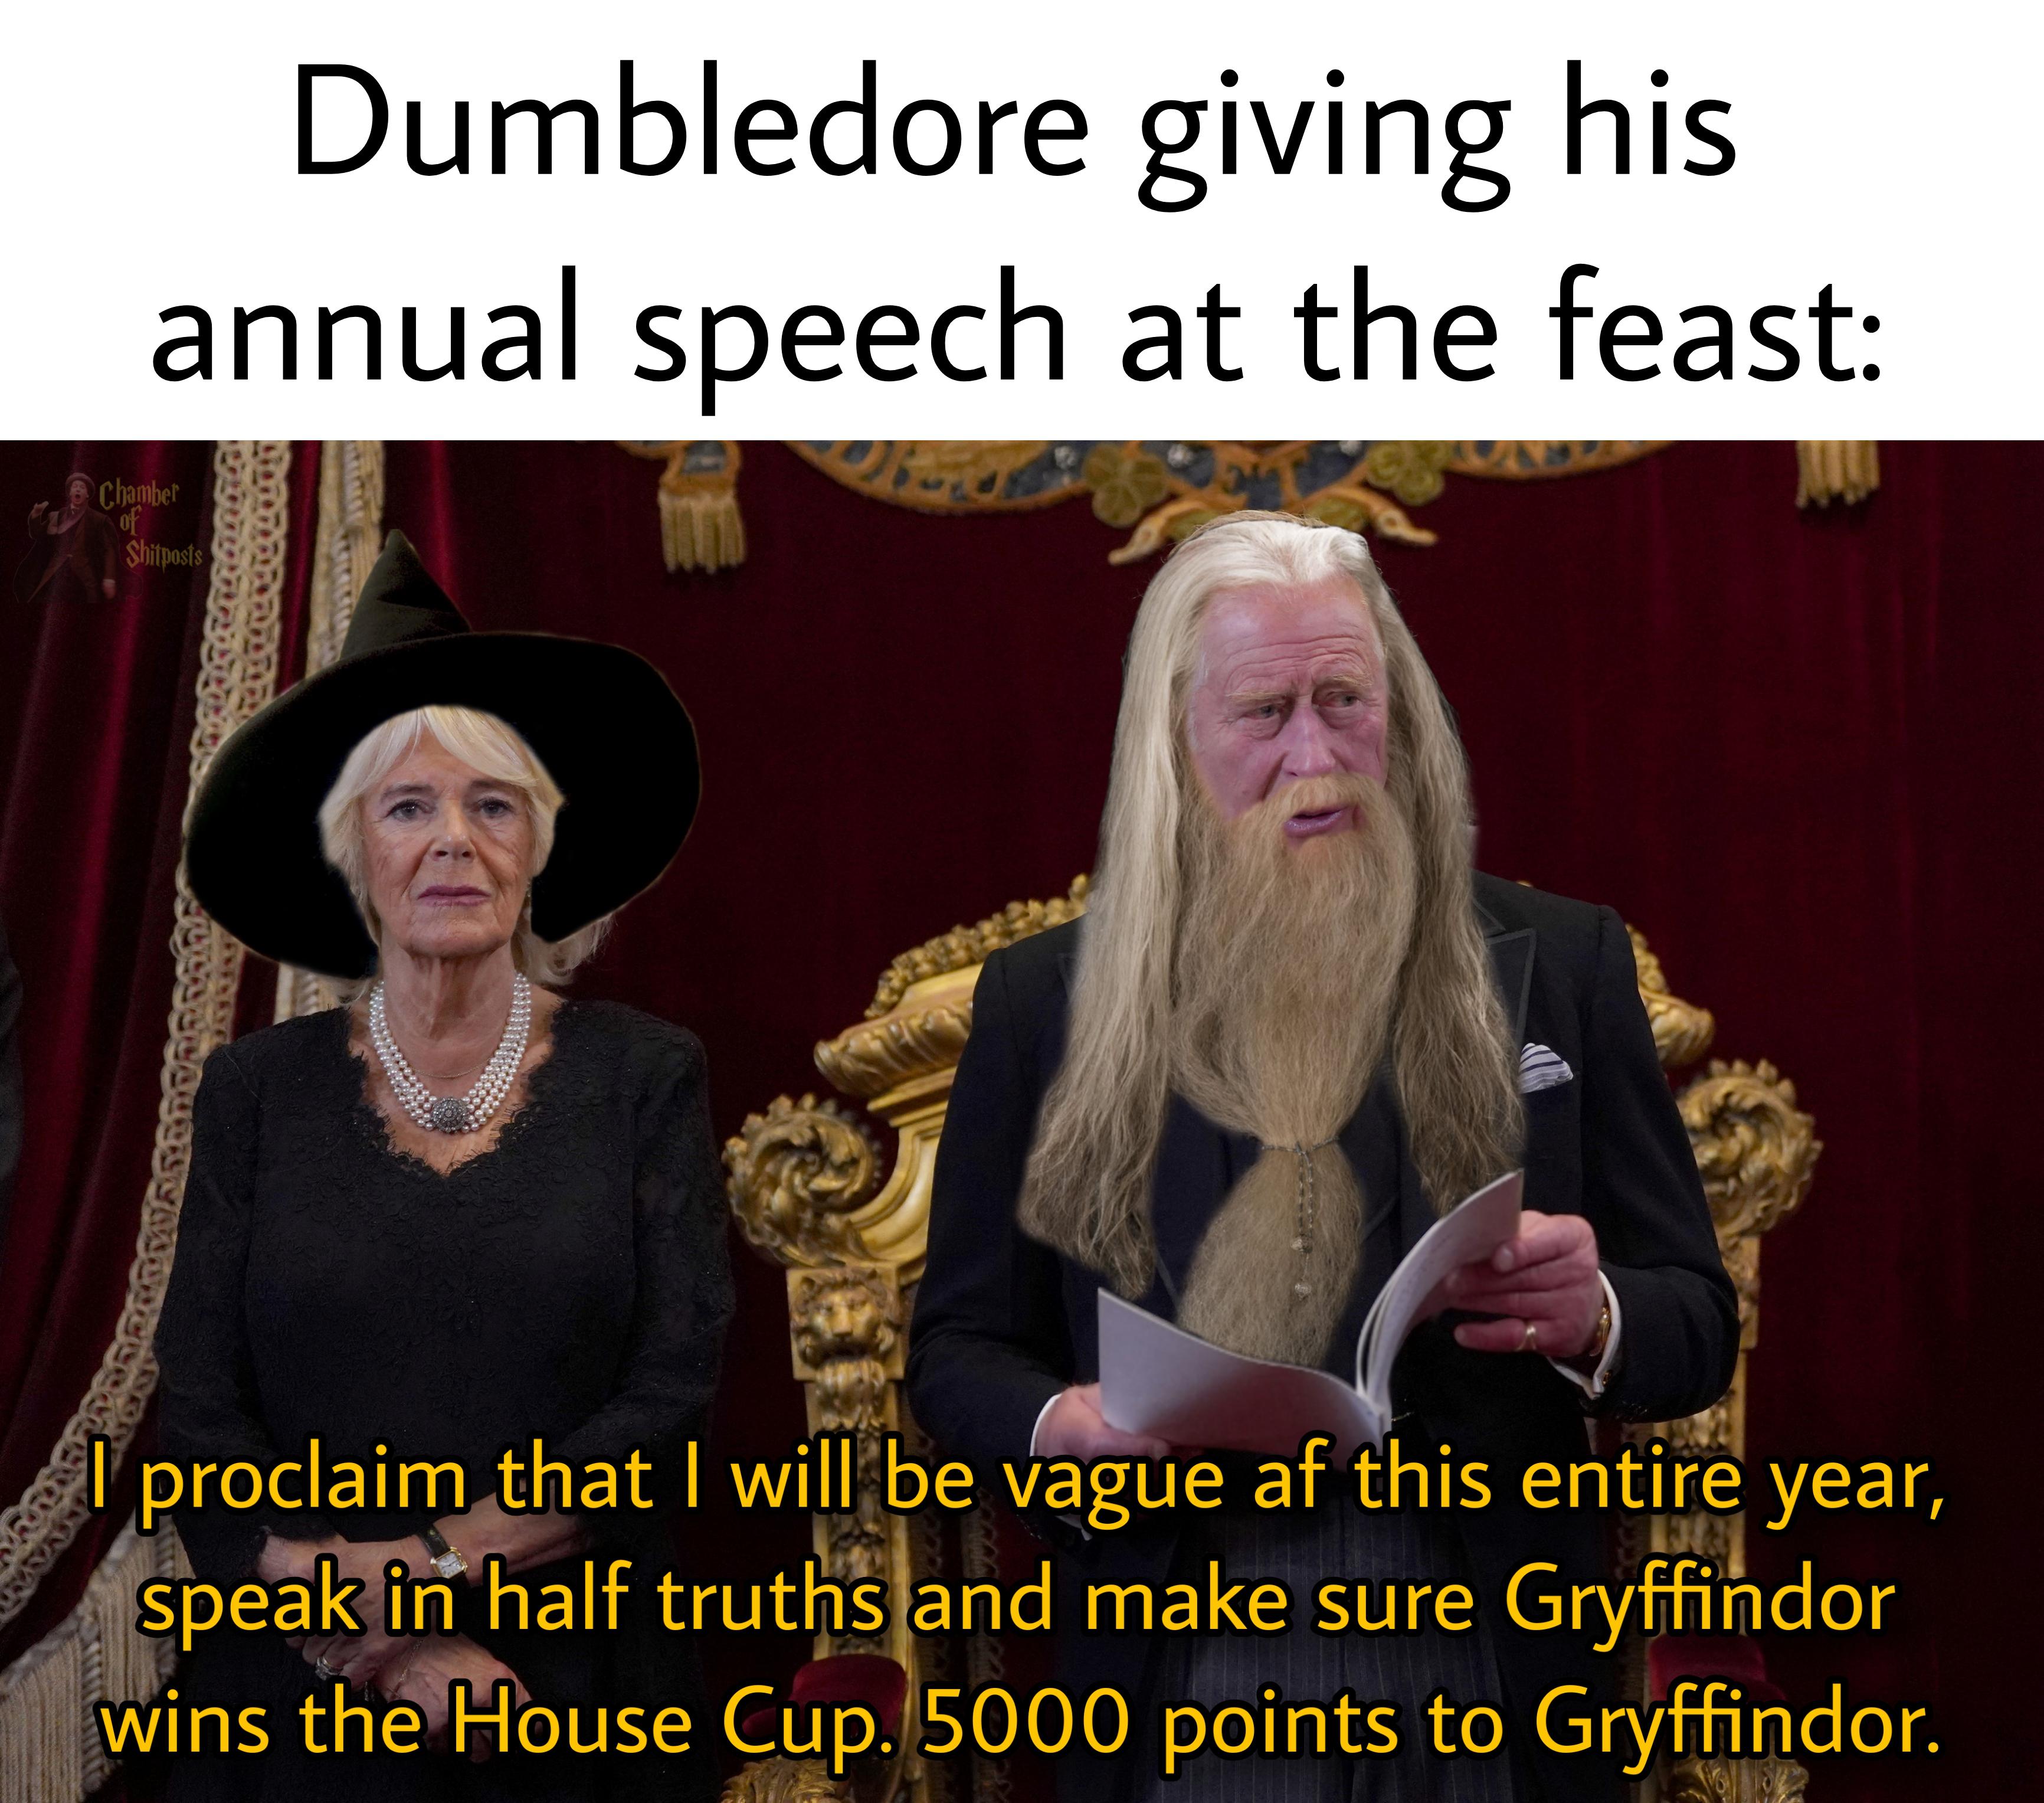 monday morning randomness - beard - Re Dumbledore giving his annual speech at the feast Chester proclaim that I will be vague af this entire year, speak in half truths and make sure Gryffindor wins the House Cup. 5000 points to Gryffindor.